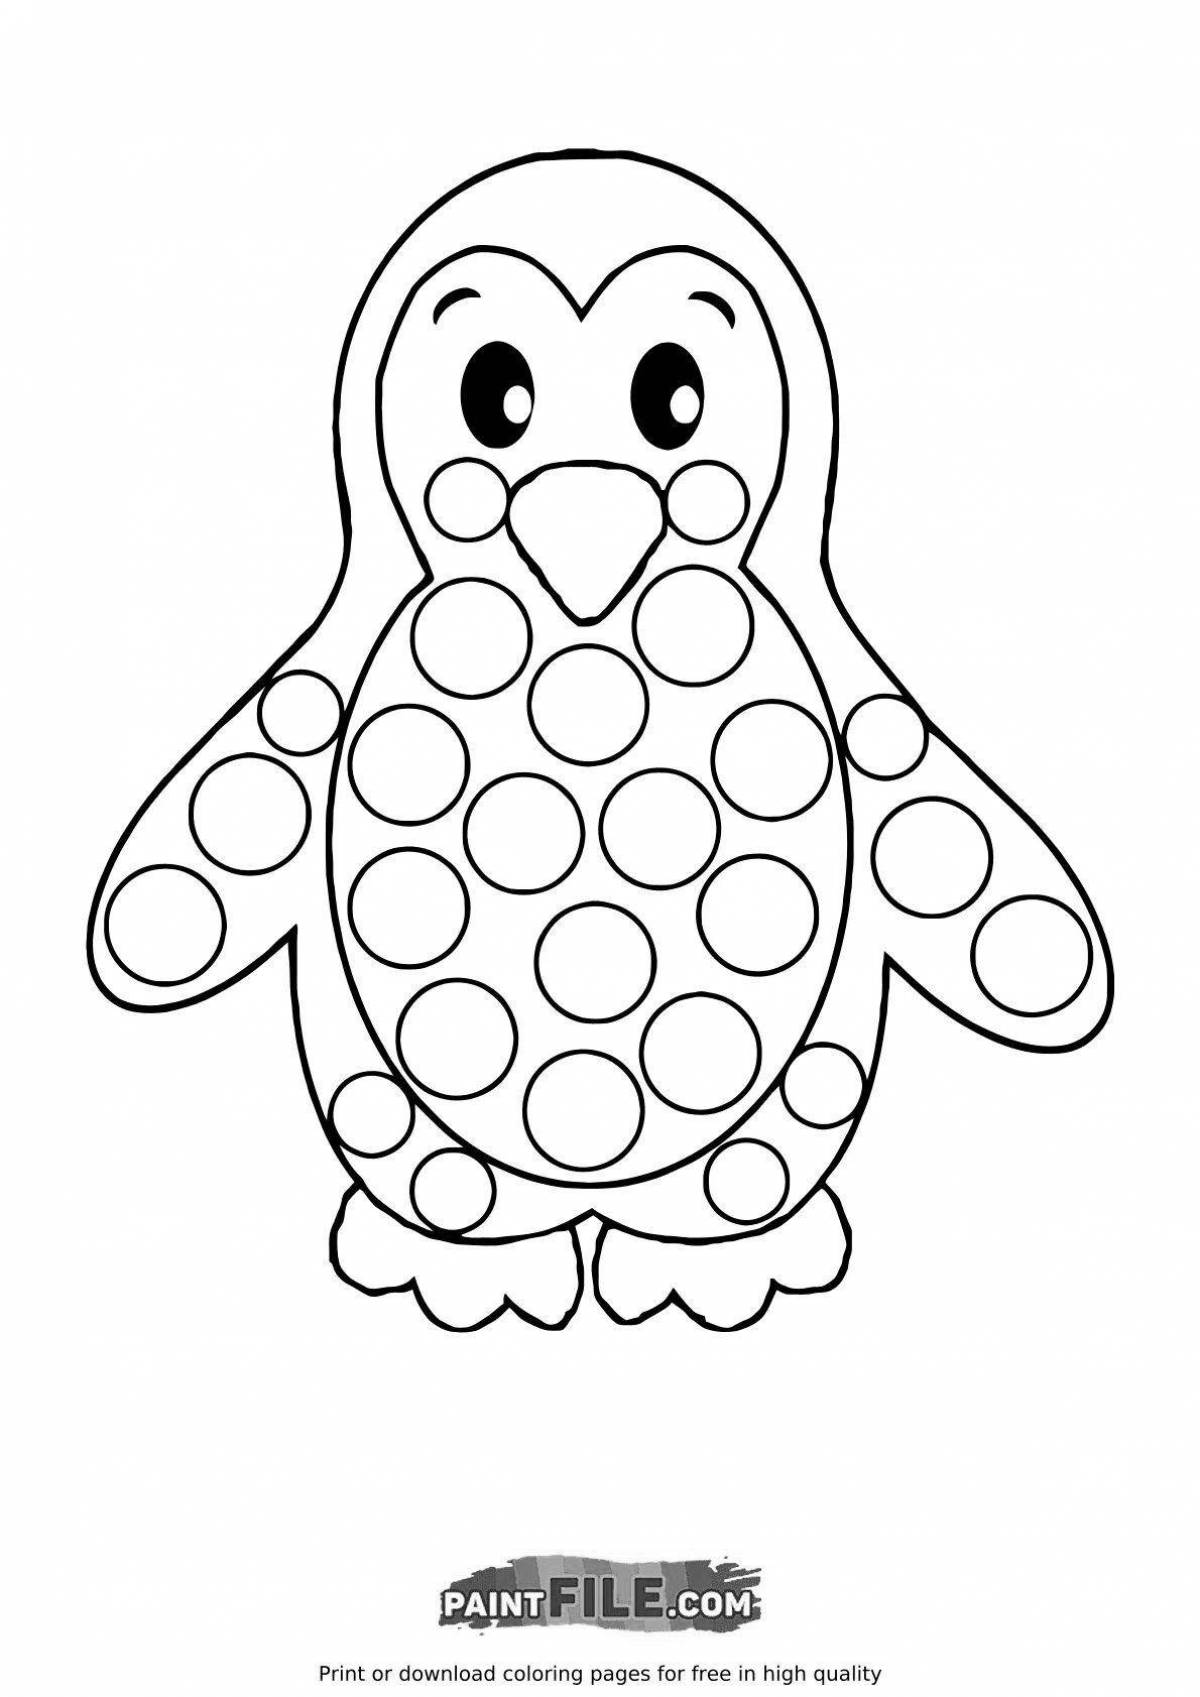 Adorable penguin pattern coloring page